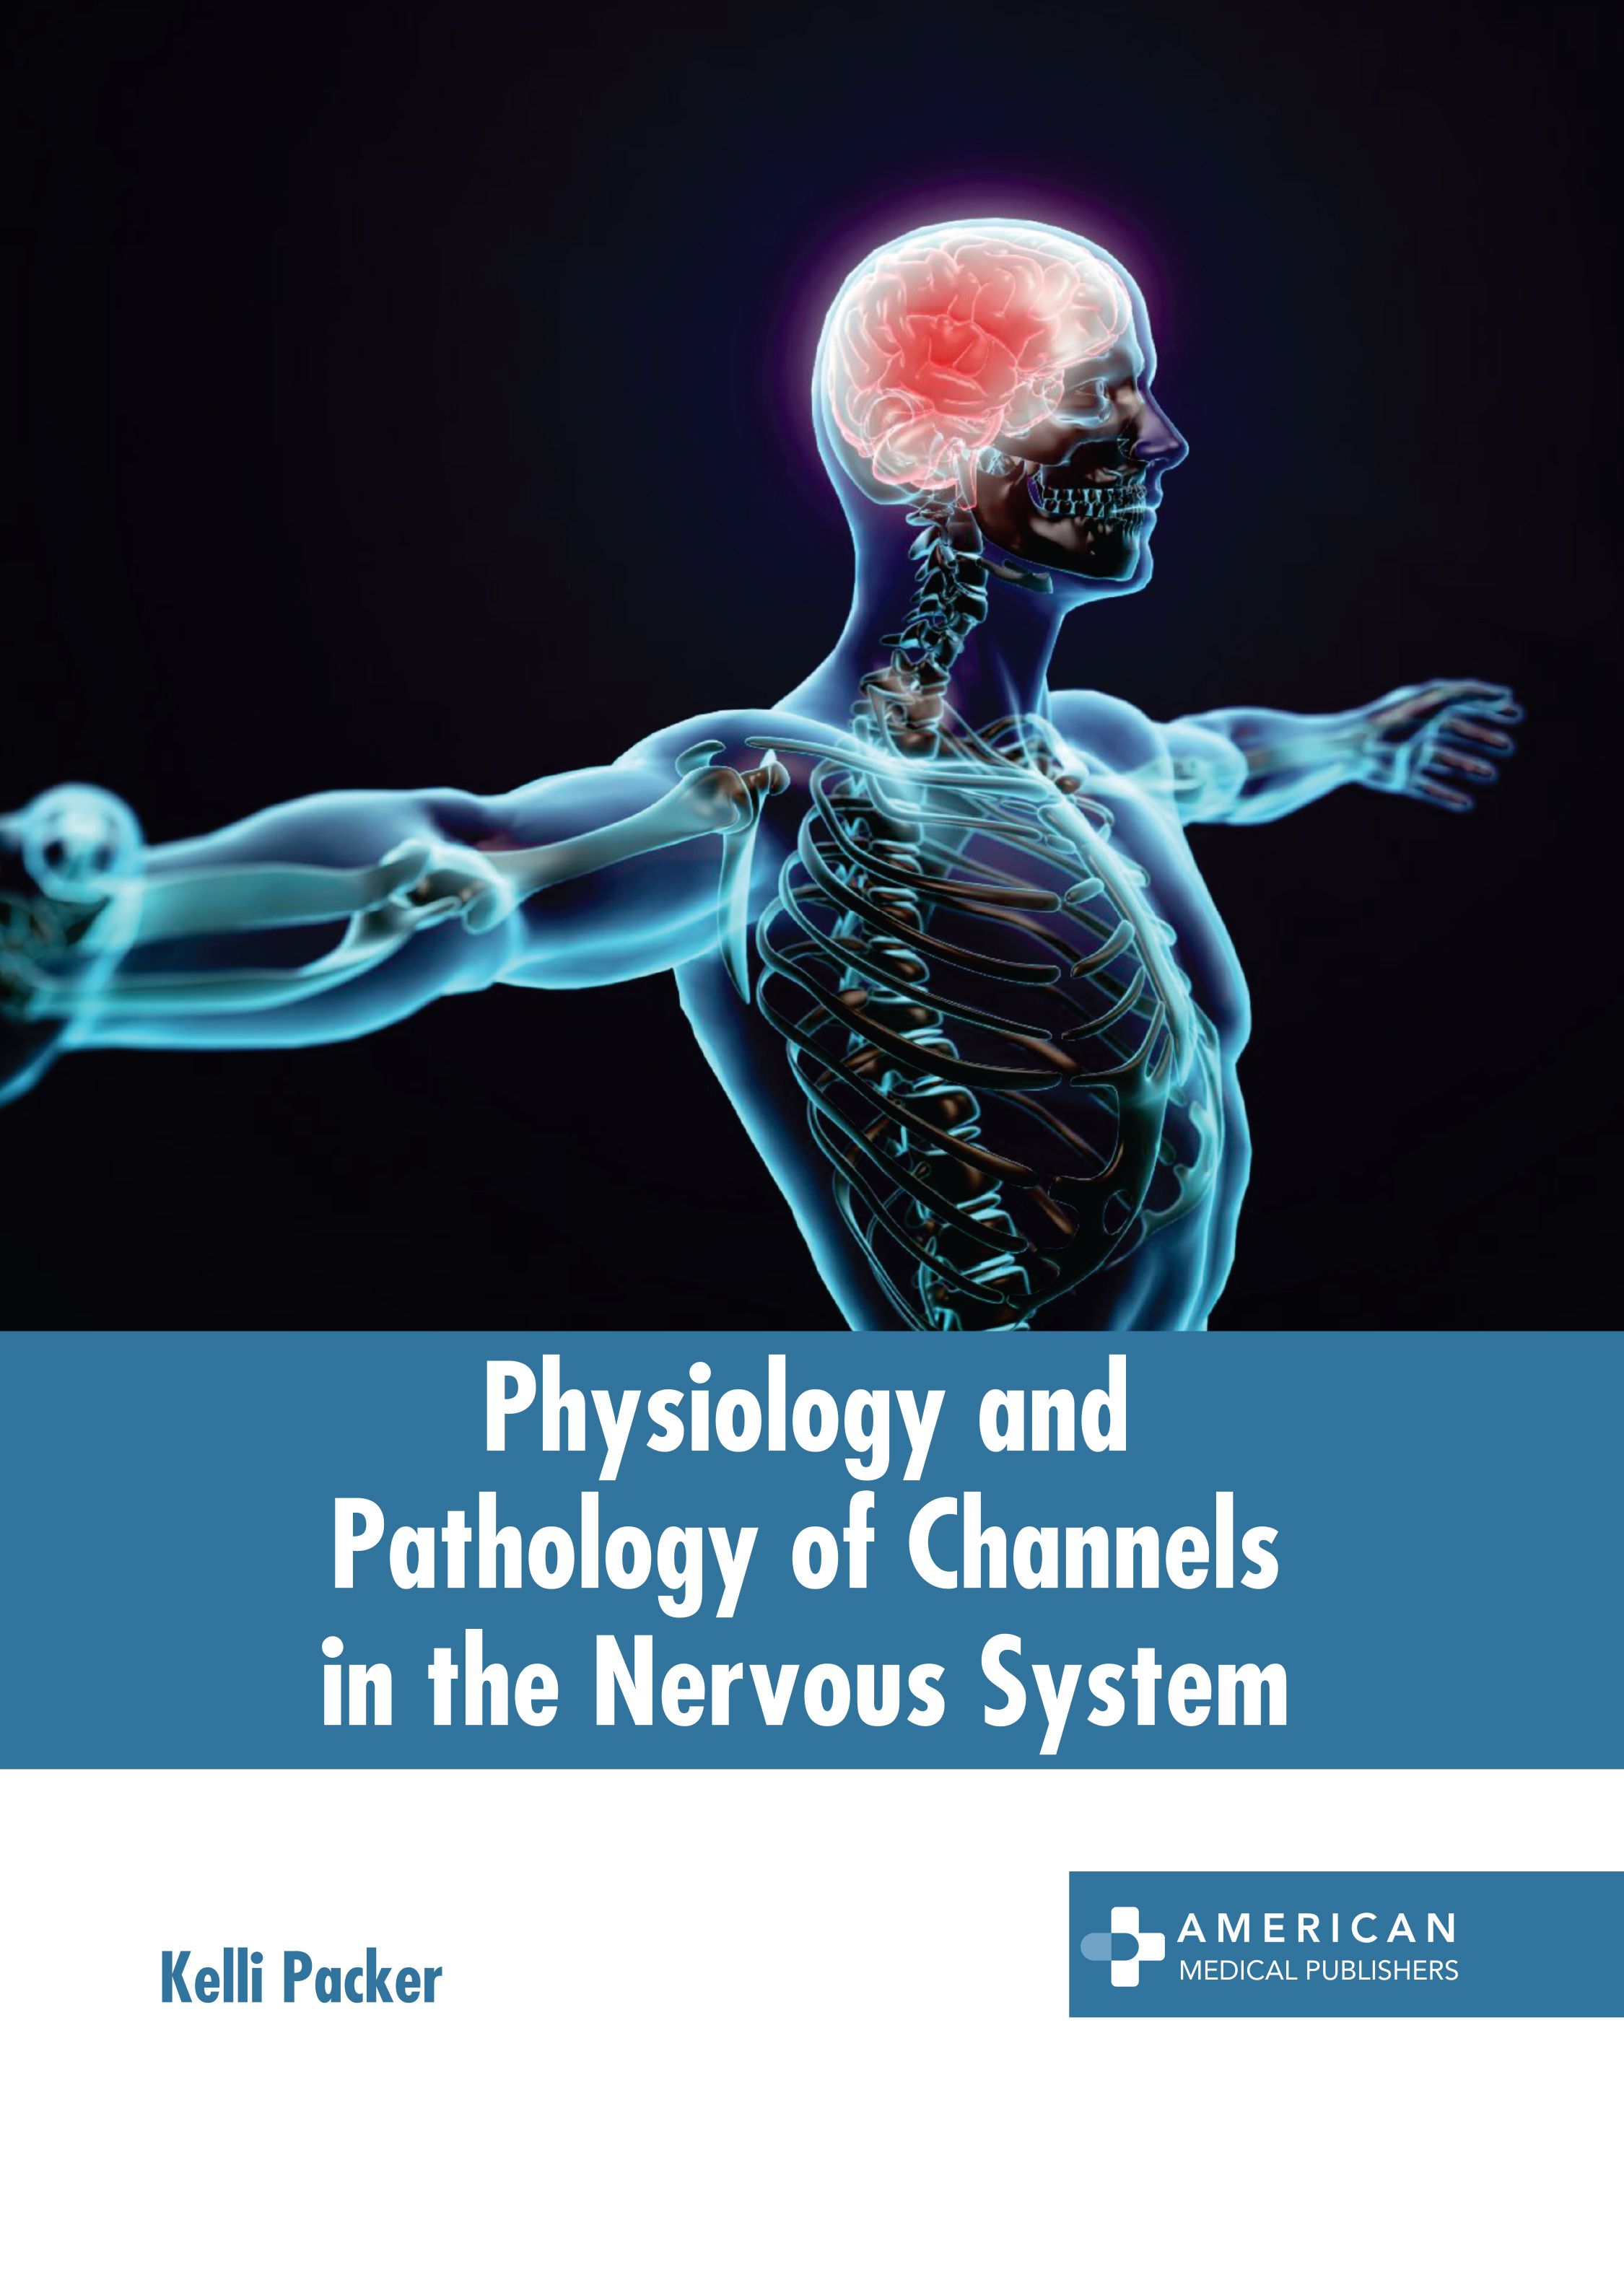 PHYSIOLOGY AND PATHOLOGY OF CHANNELS IN THE NERVOUS SYSTEM